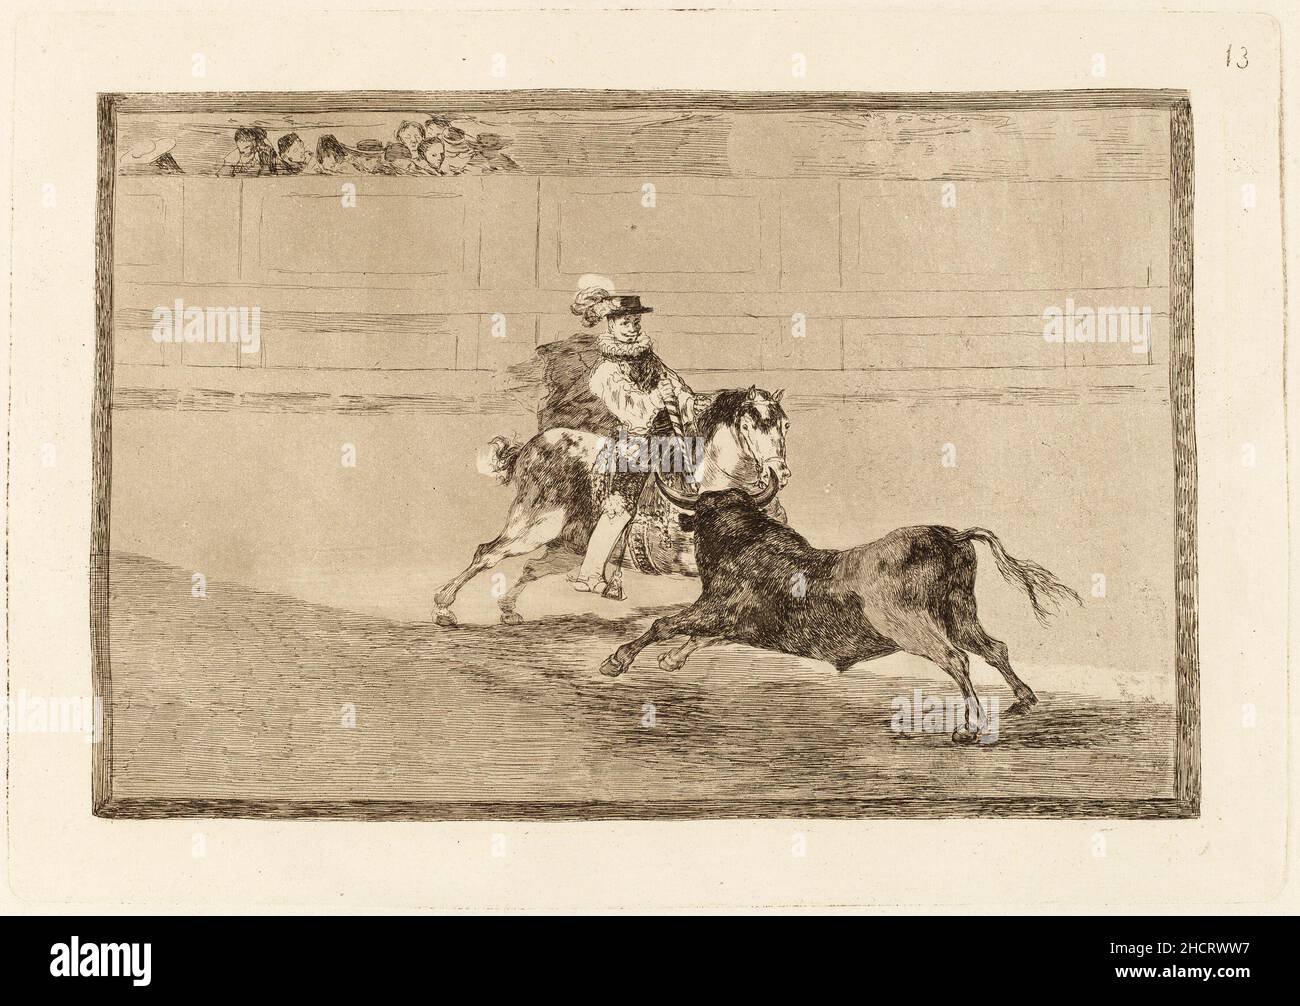 Francisco de Goya, Un caballero espanol en plaza quebrando rejoncillos sin auxilio de los chulos (A Spanish Mounted Knight in the Ring Breaking Short Spears without the Help of Assistants). This is print number 13 in a 33 print series on bullfighting. Stock Photo